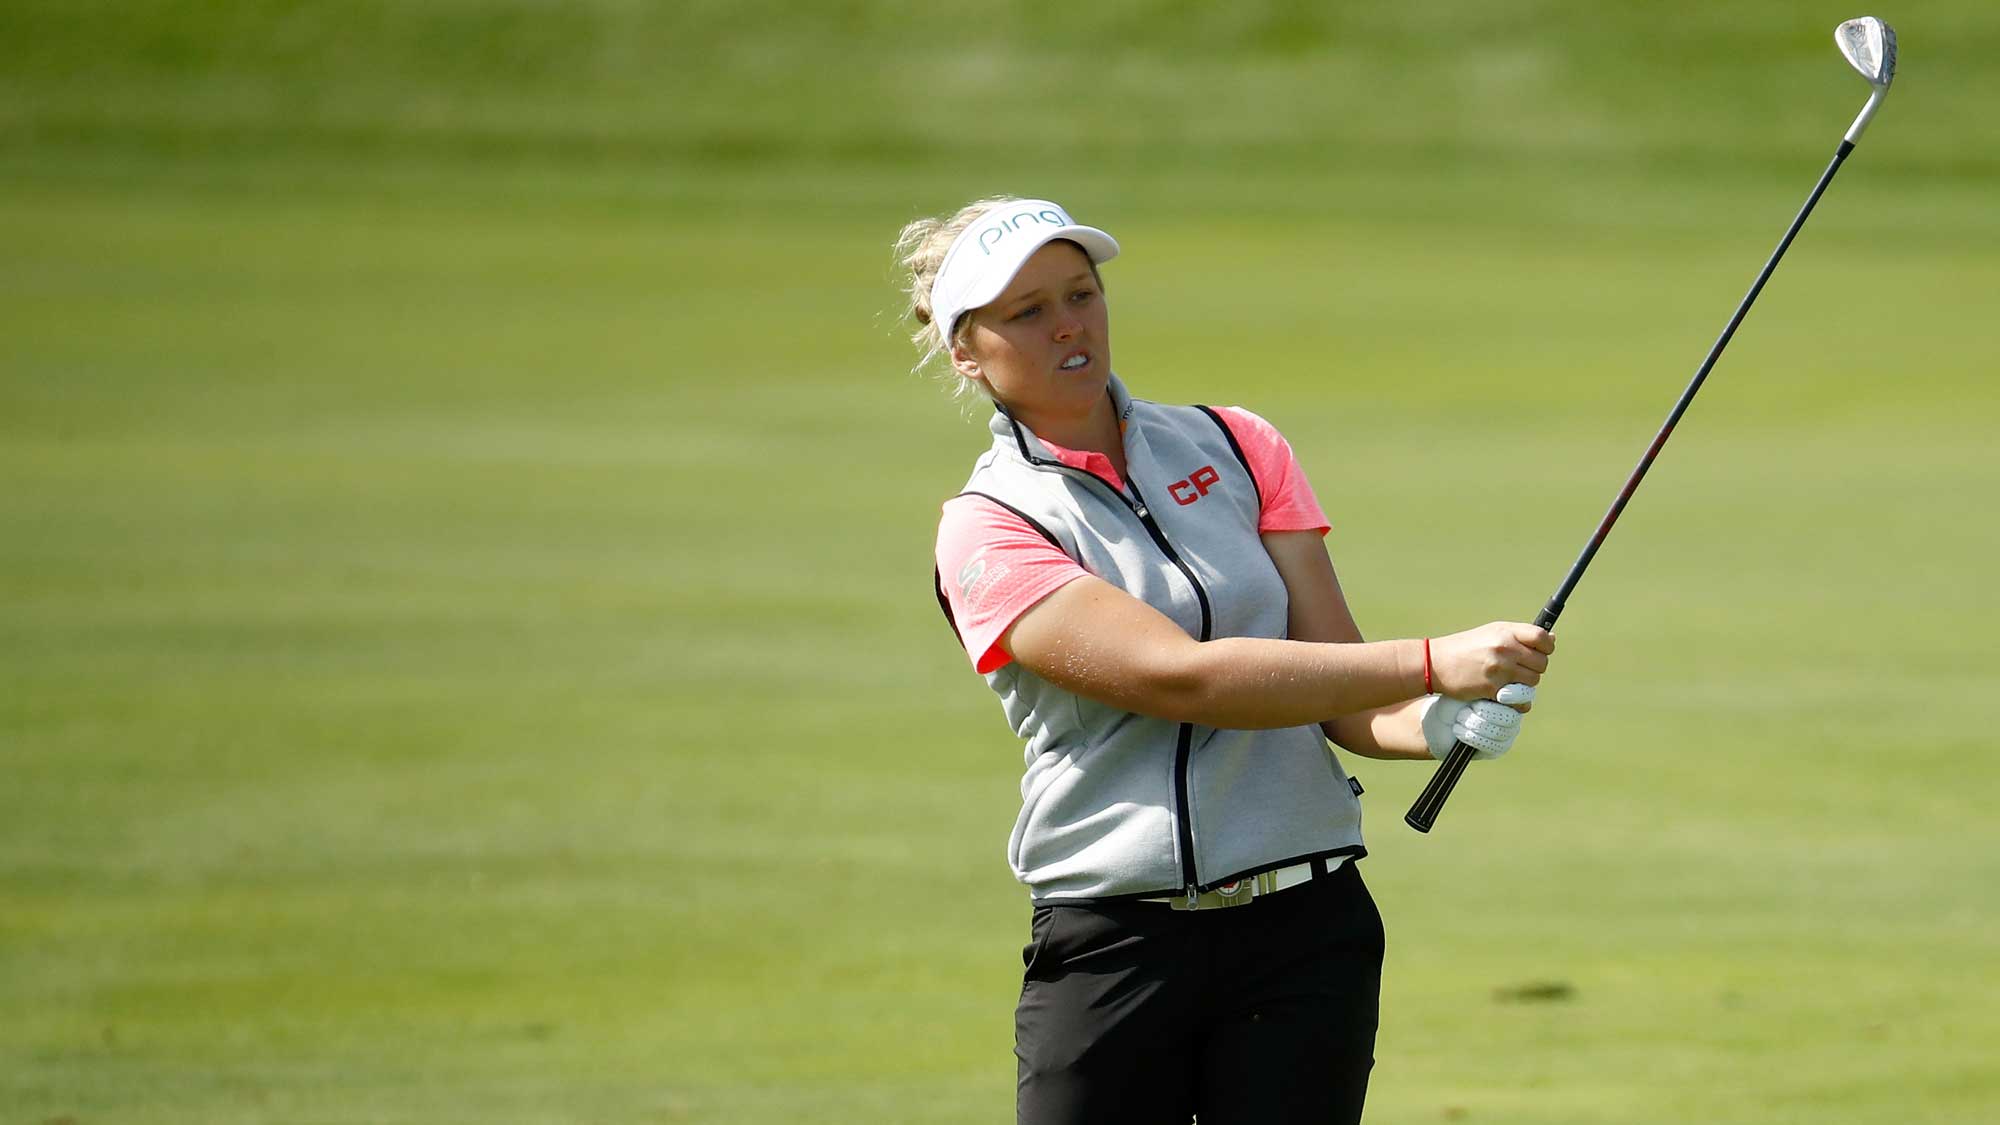 Brooke Henderson of Canada hits her second shot on the 9th hole during the first round of the Indy Women In Tech Championship-Presented By Guggenheim